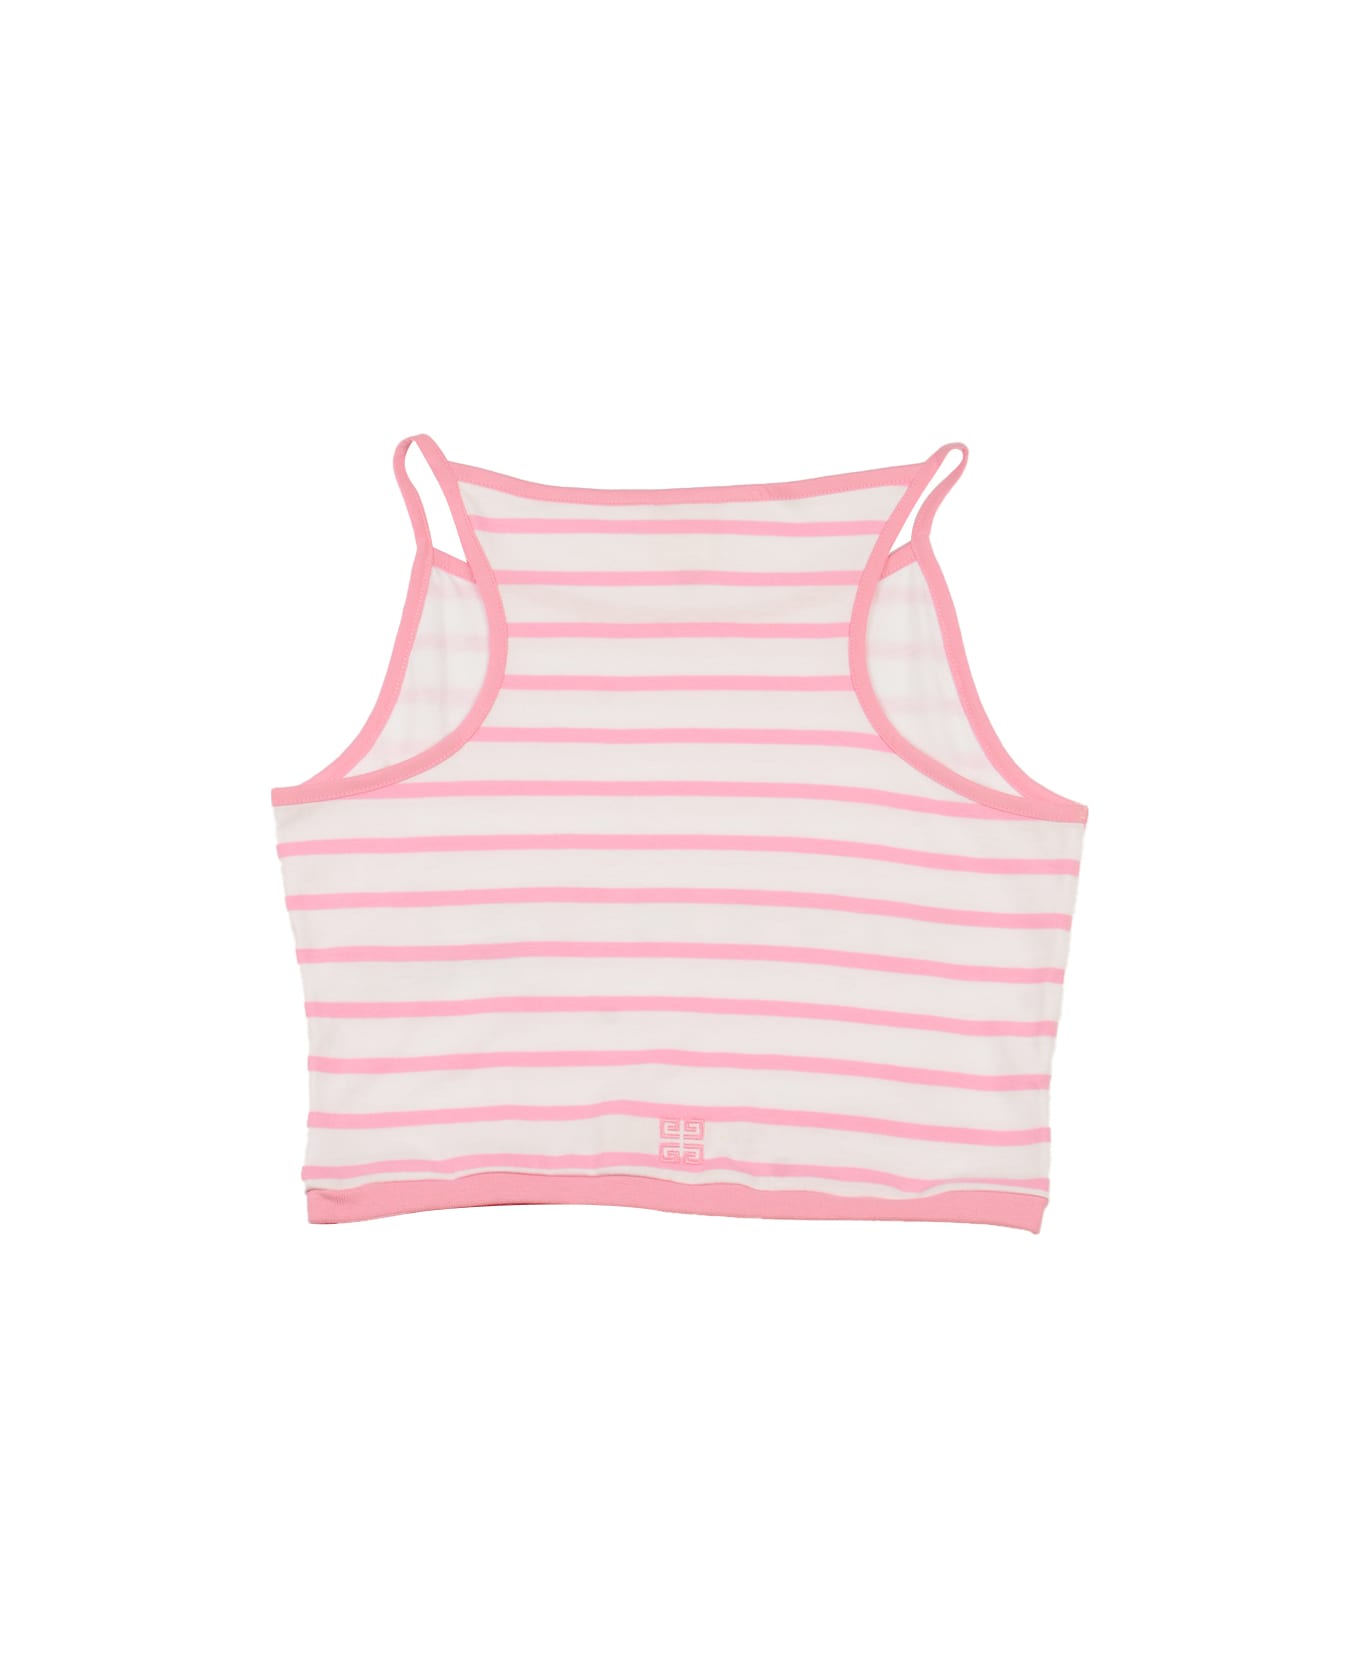 Givenchy Logo Embroidered Stripe Top - White/Pink